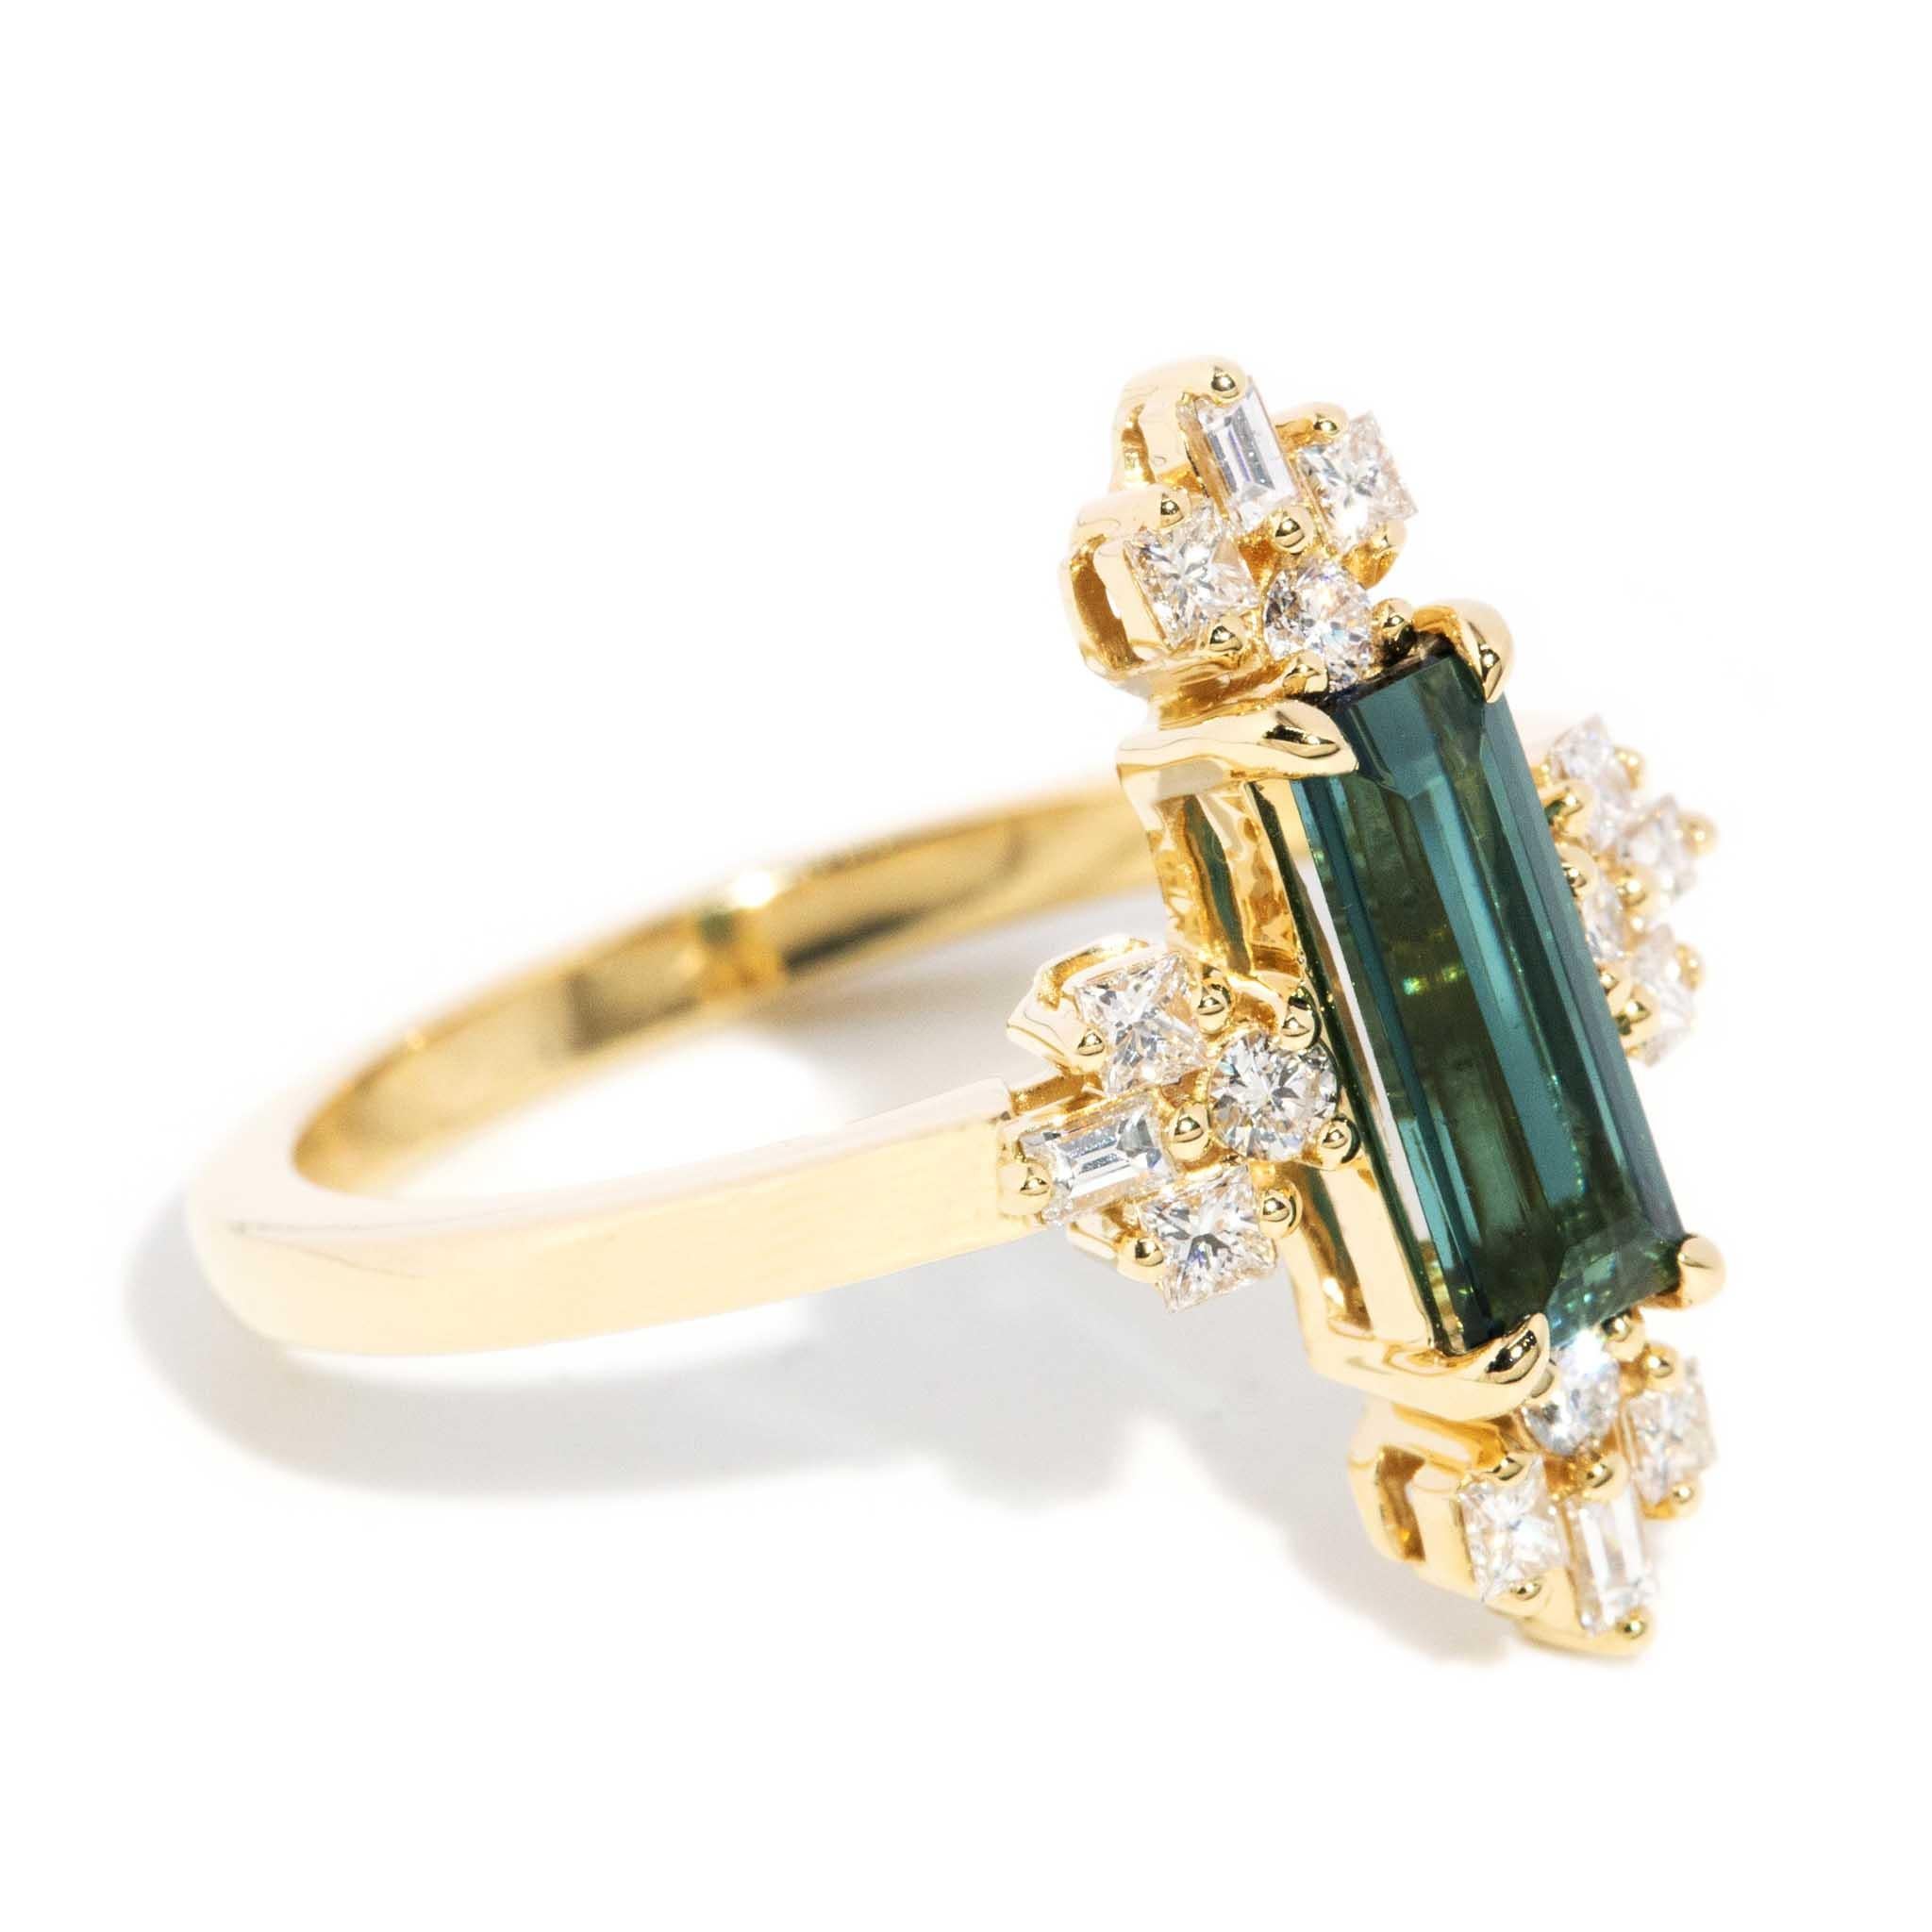 Contemporary Baguette Indicolite Tourmaline & Diamond Ring 18 Carat Yellow Gold For Sale 1